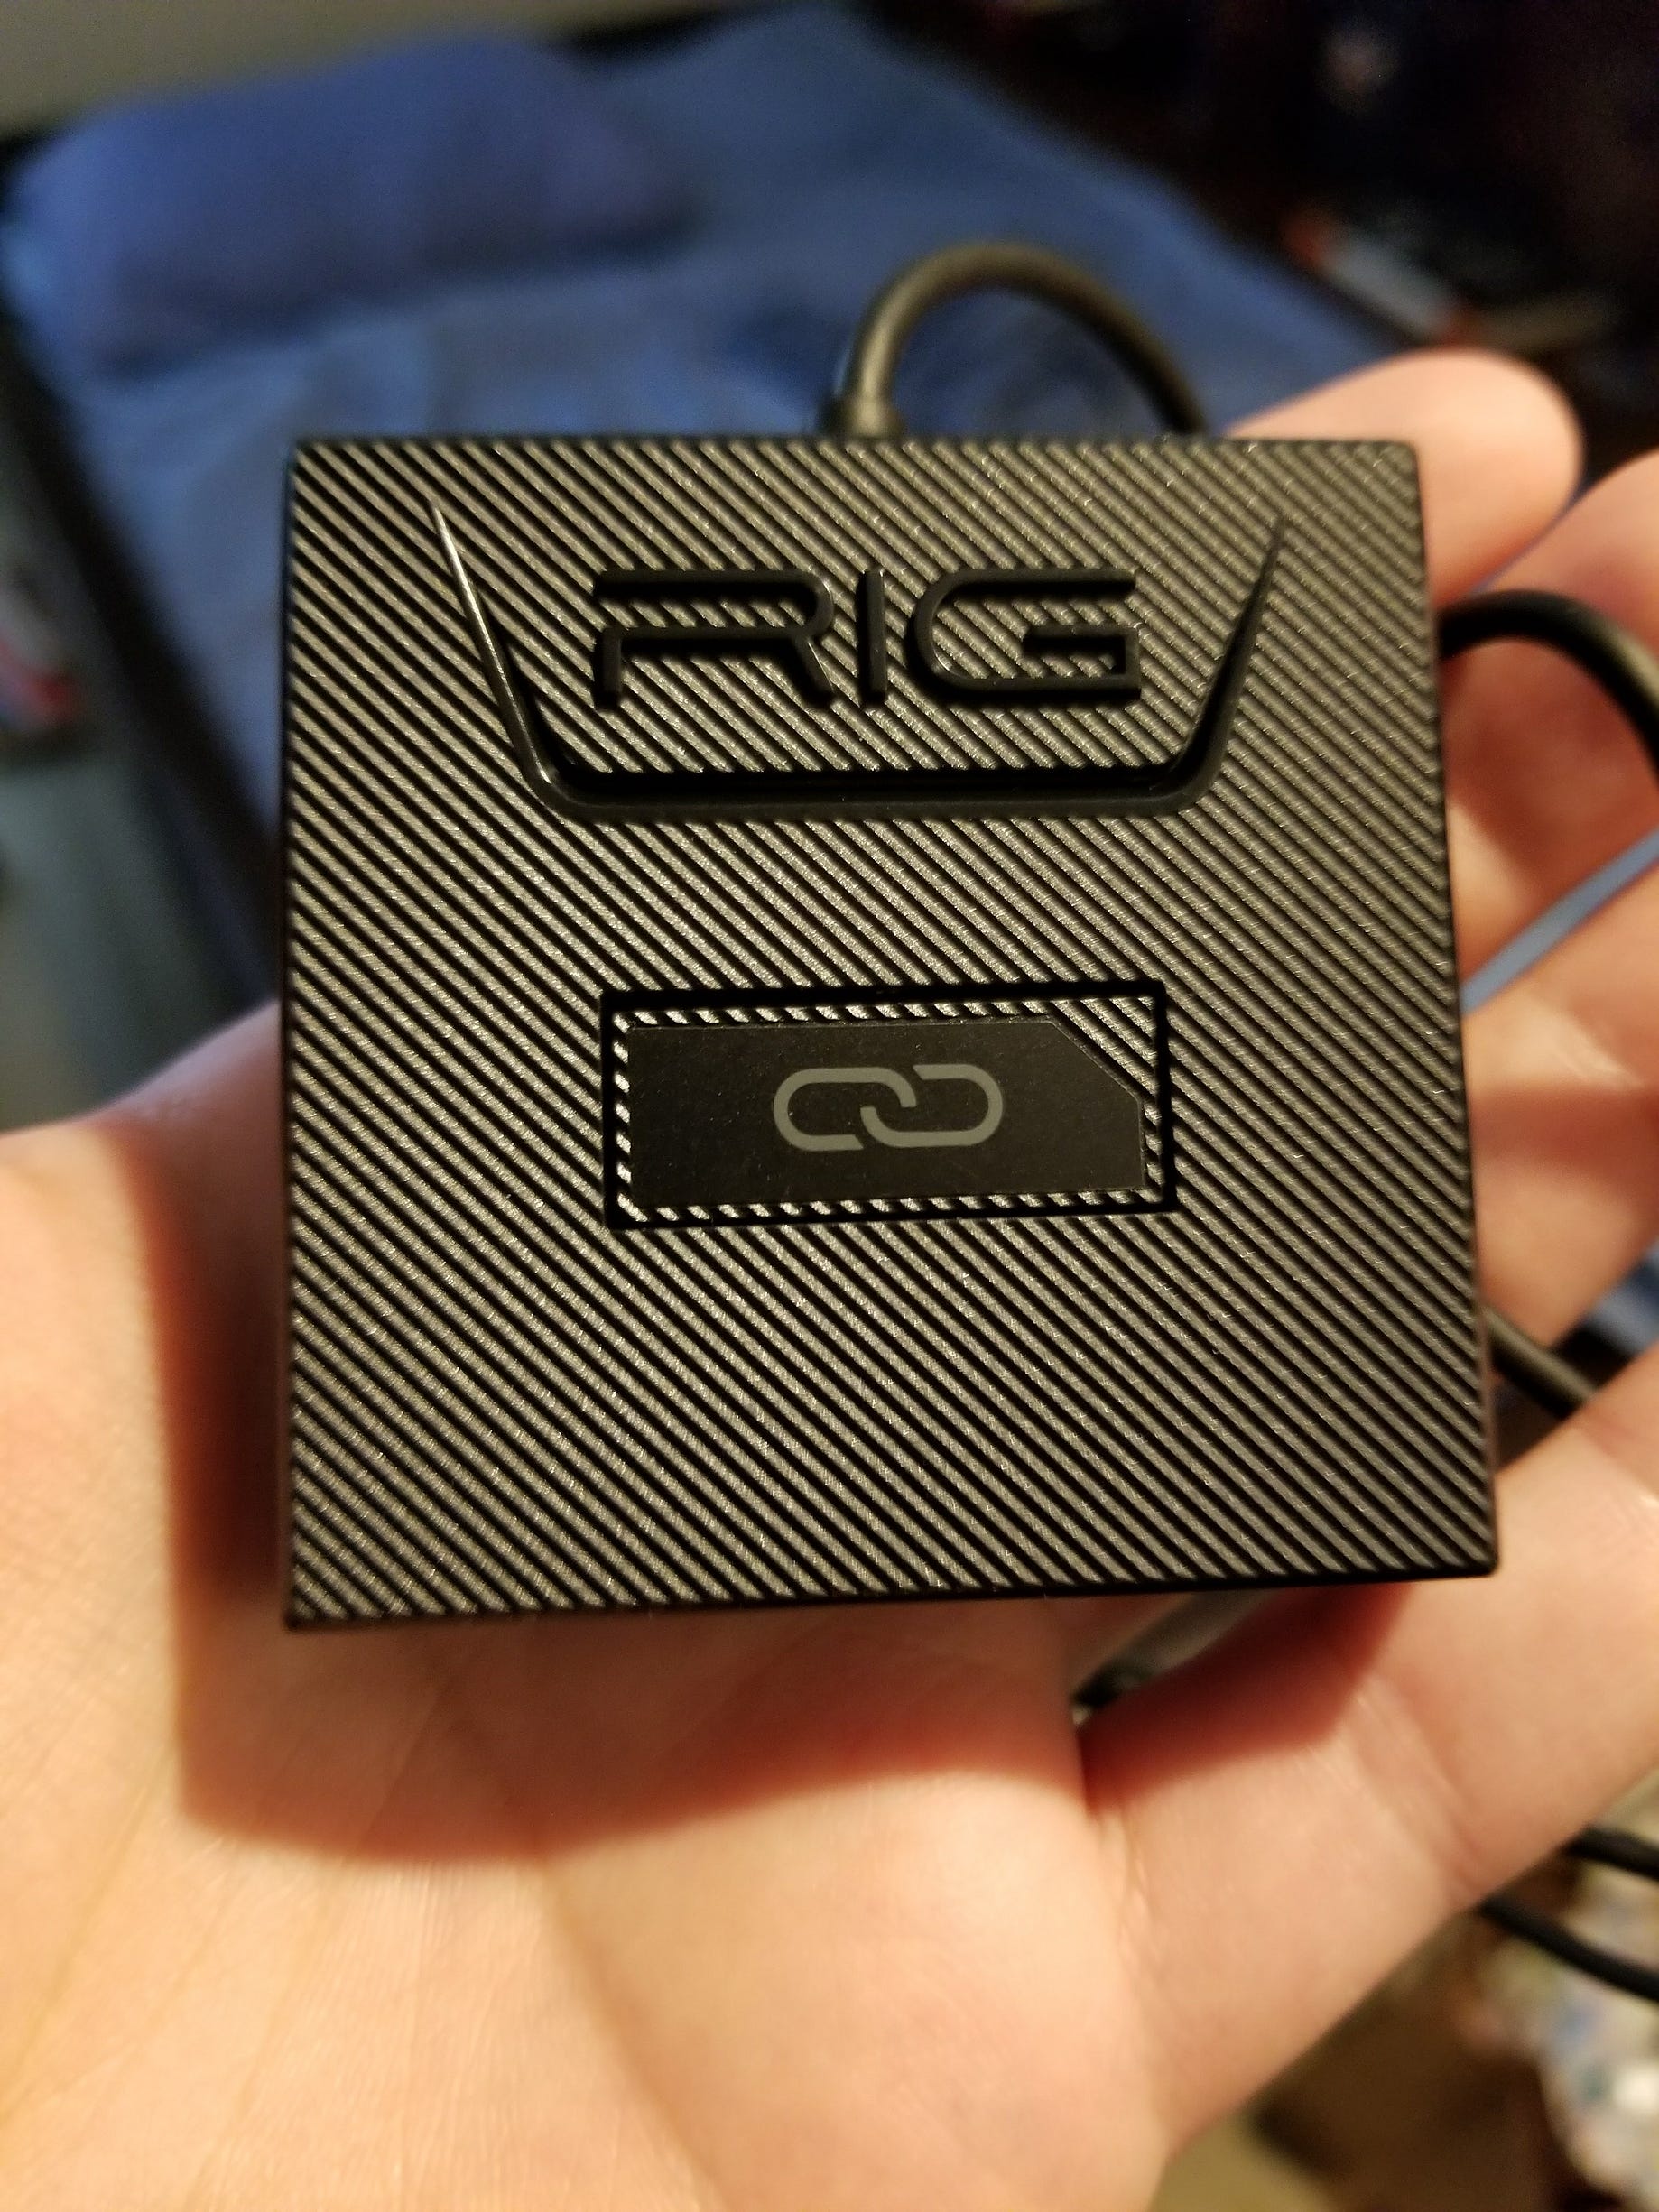 rig 800 wireless for Sale OFF 72%